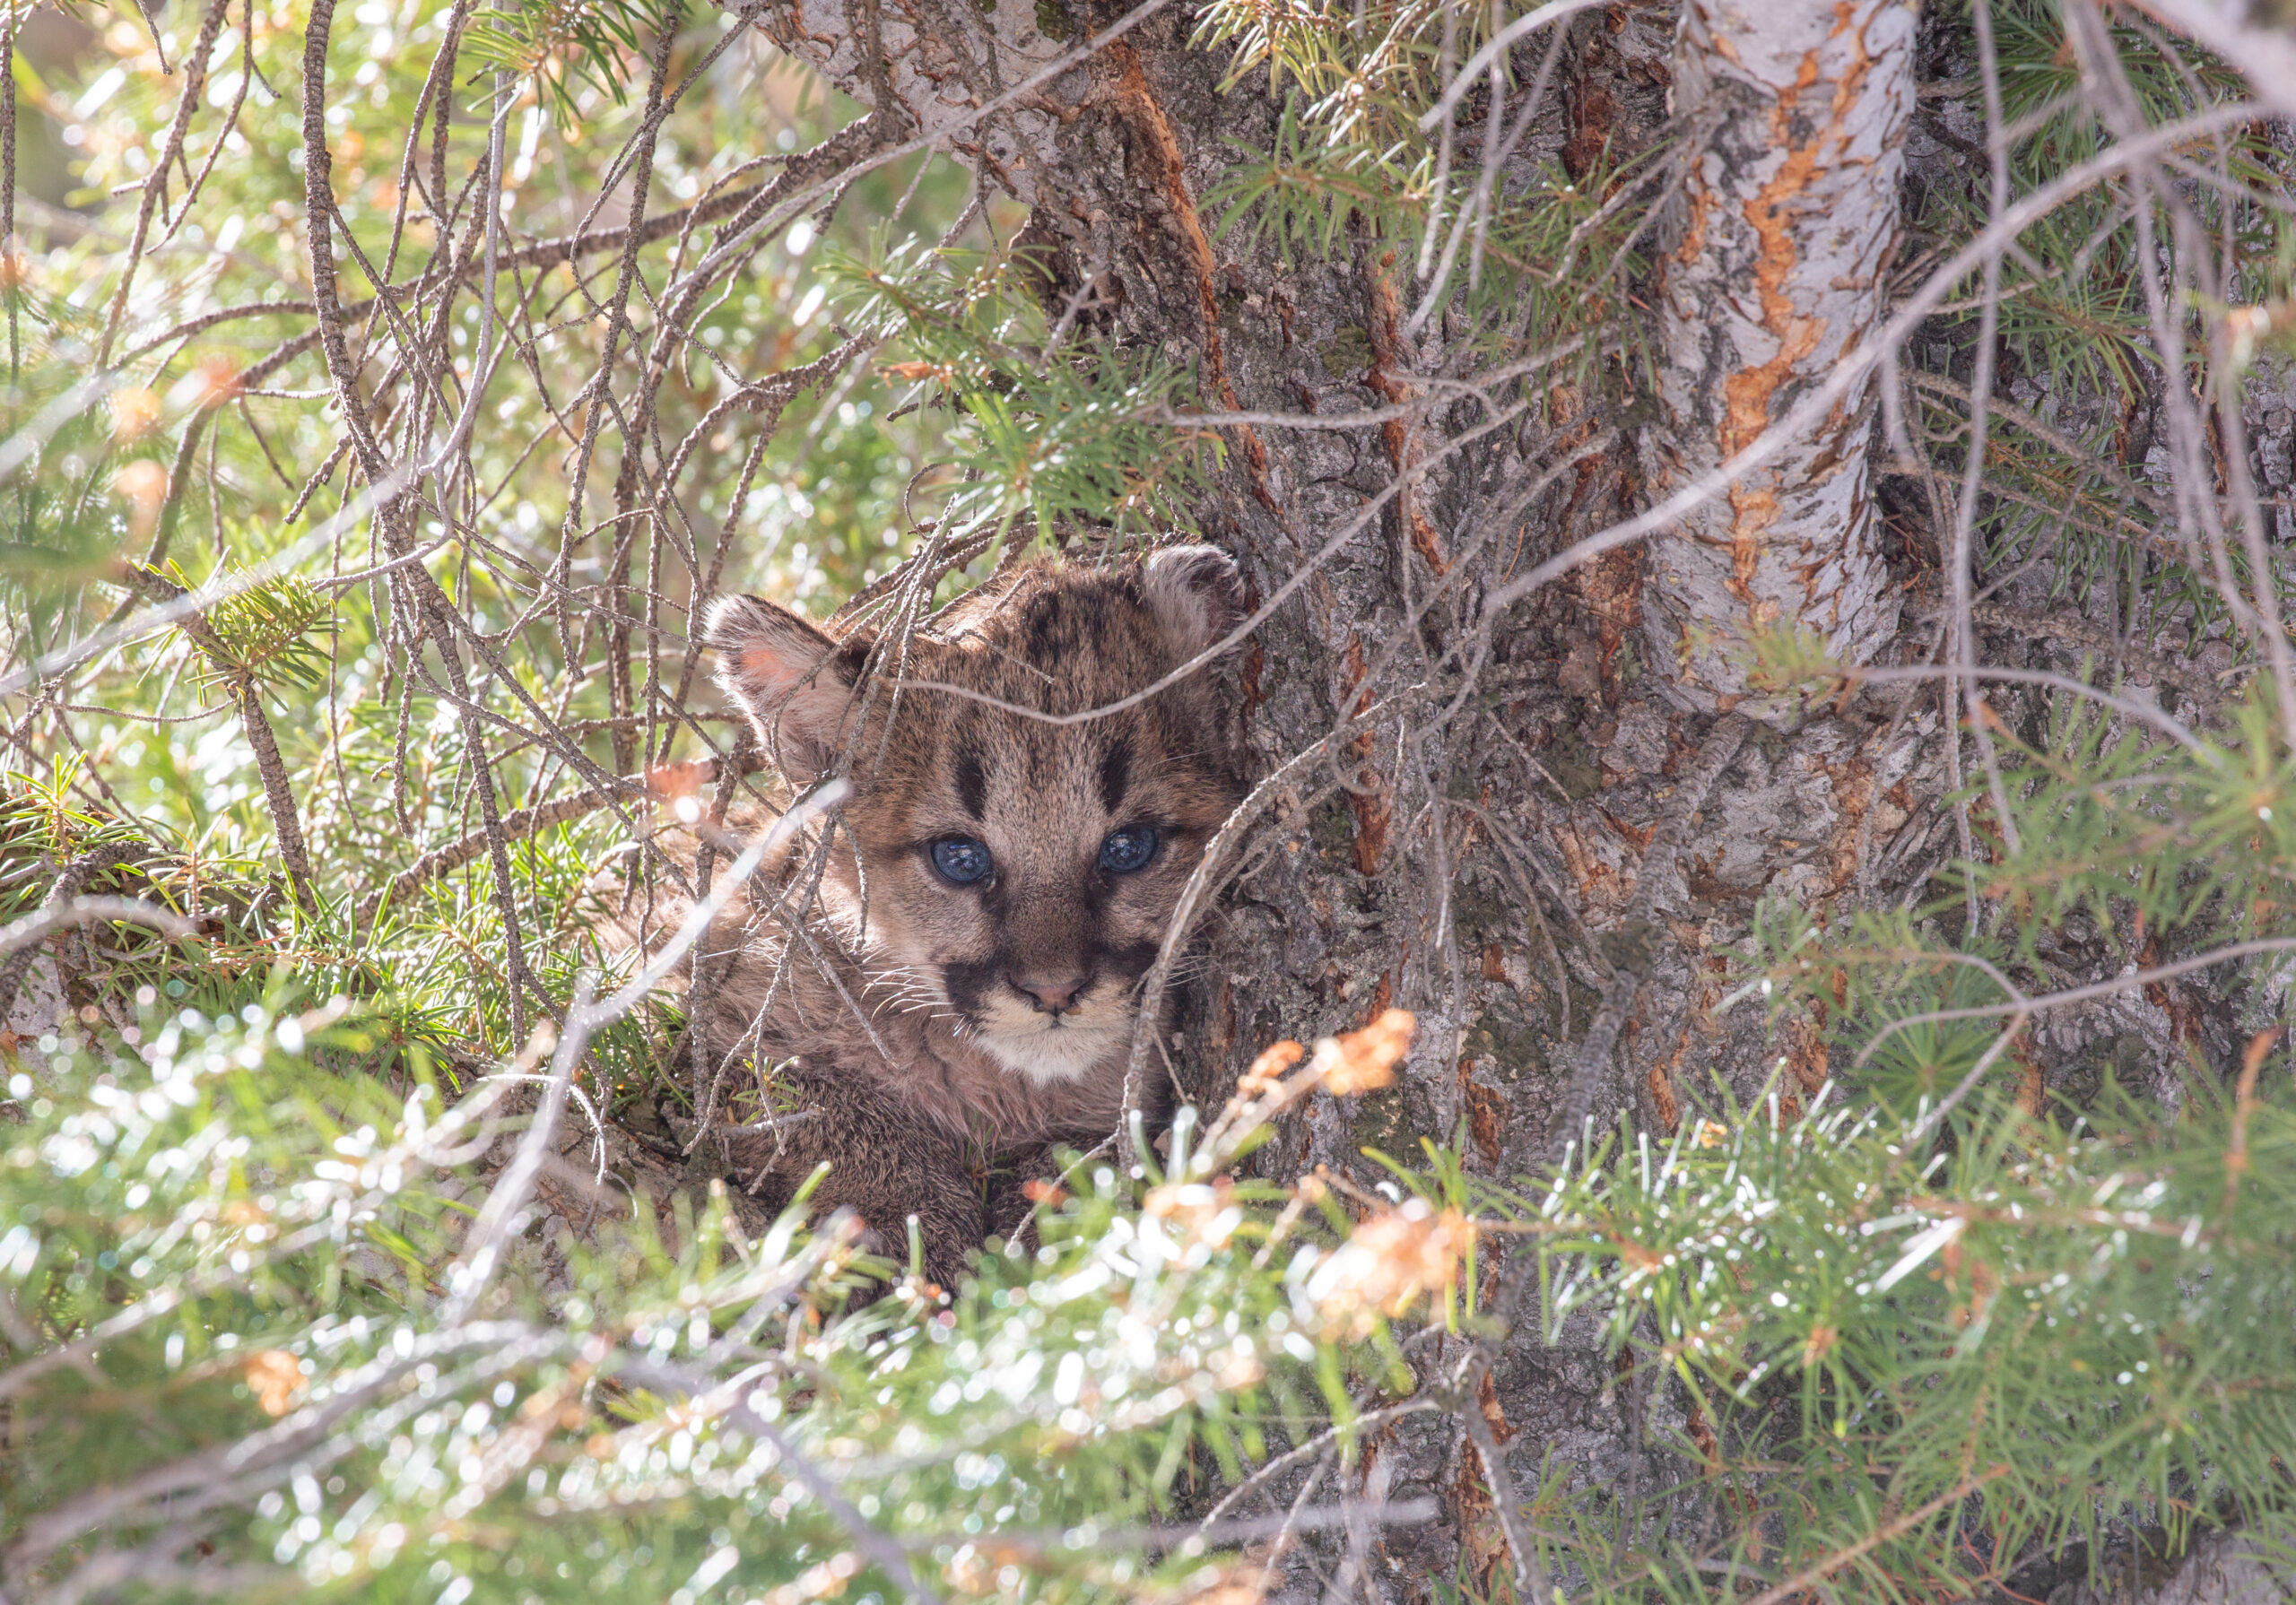 Two cougar kittens were found shot and dismembered last week.